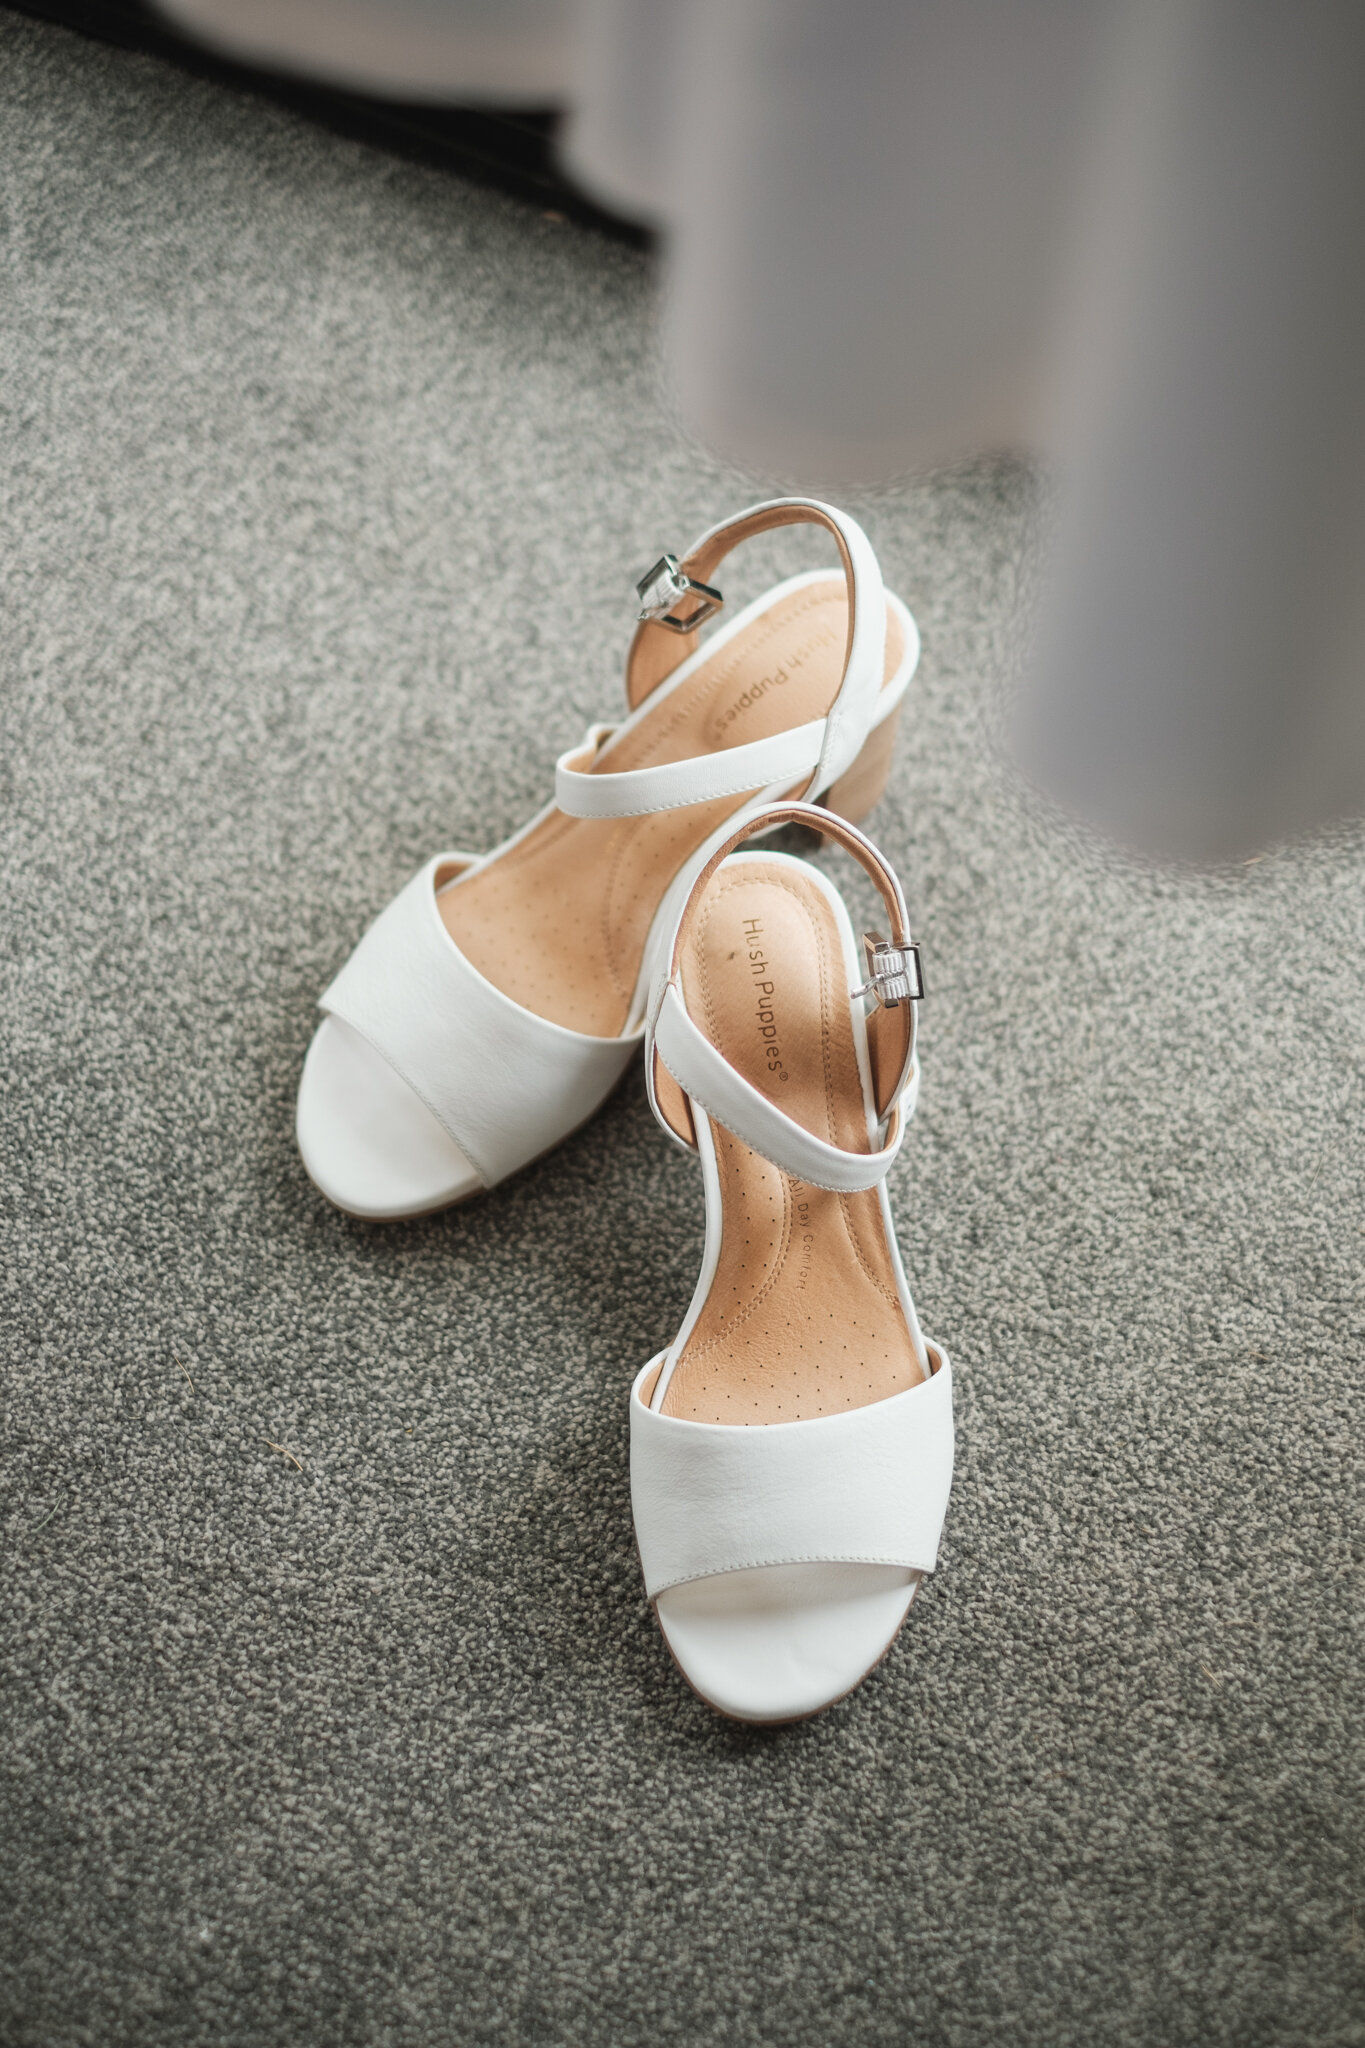 Bride's white wedding shoes with small heel